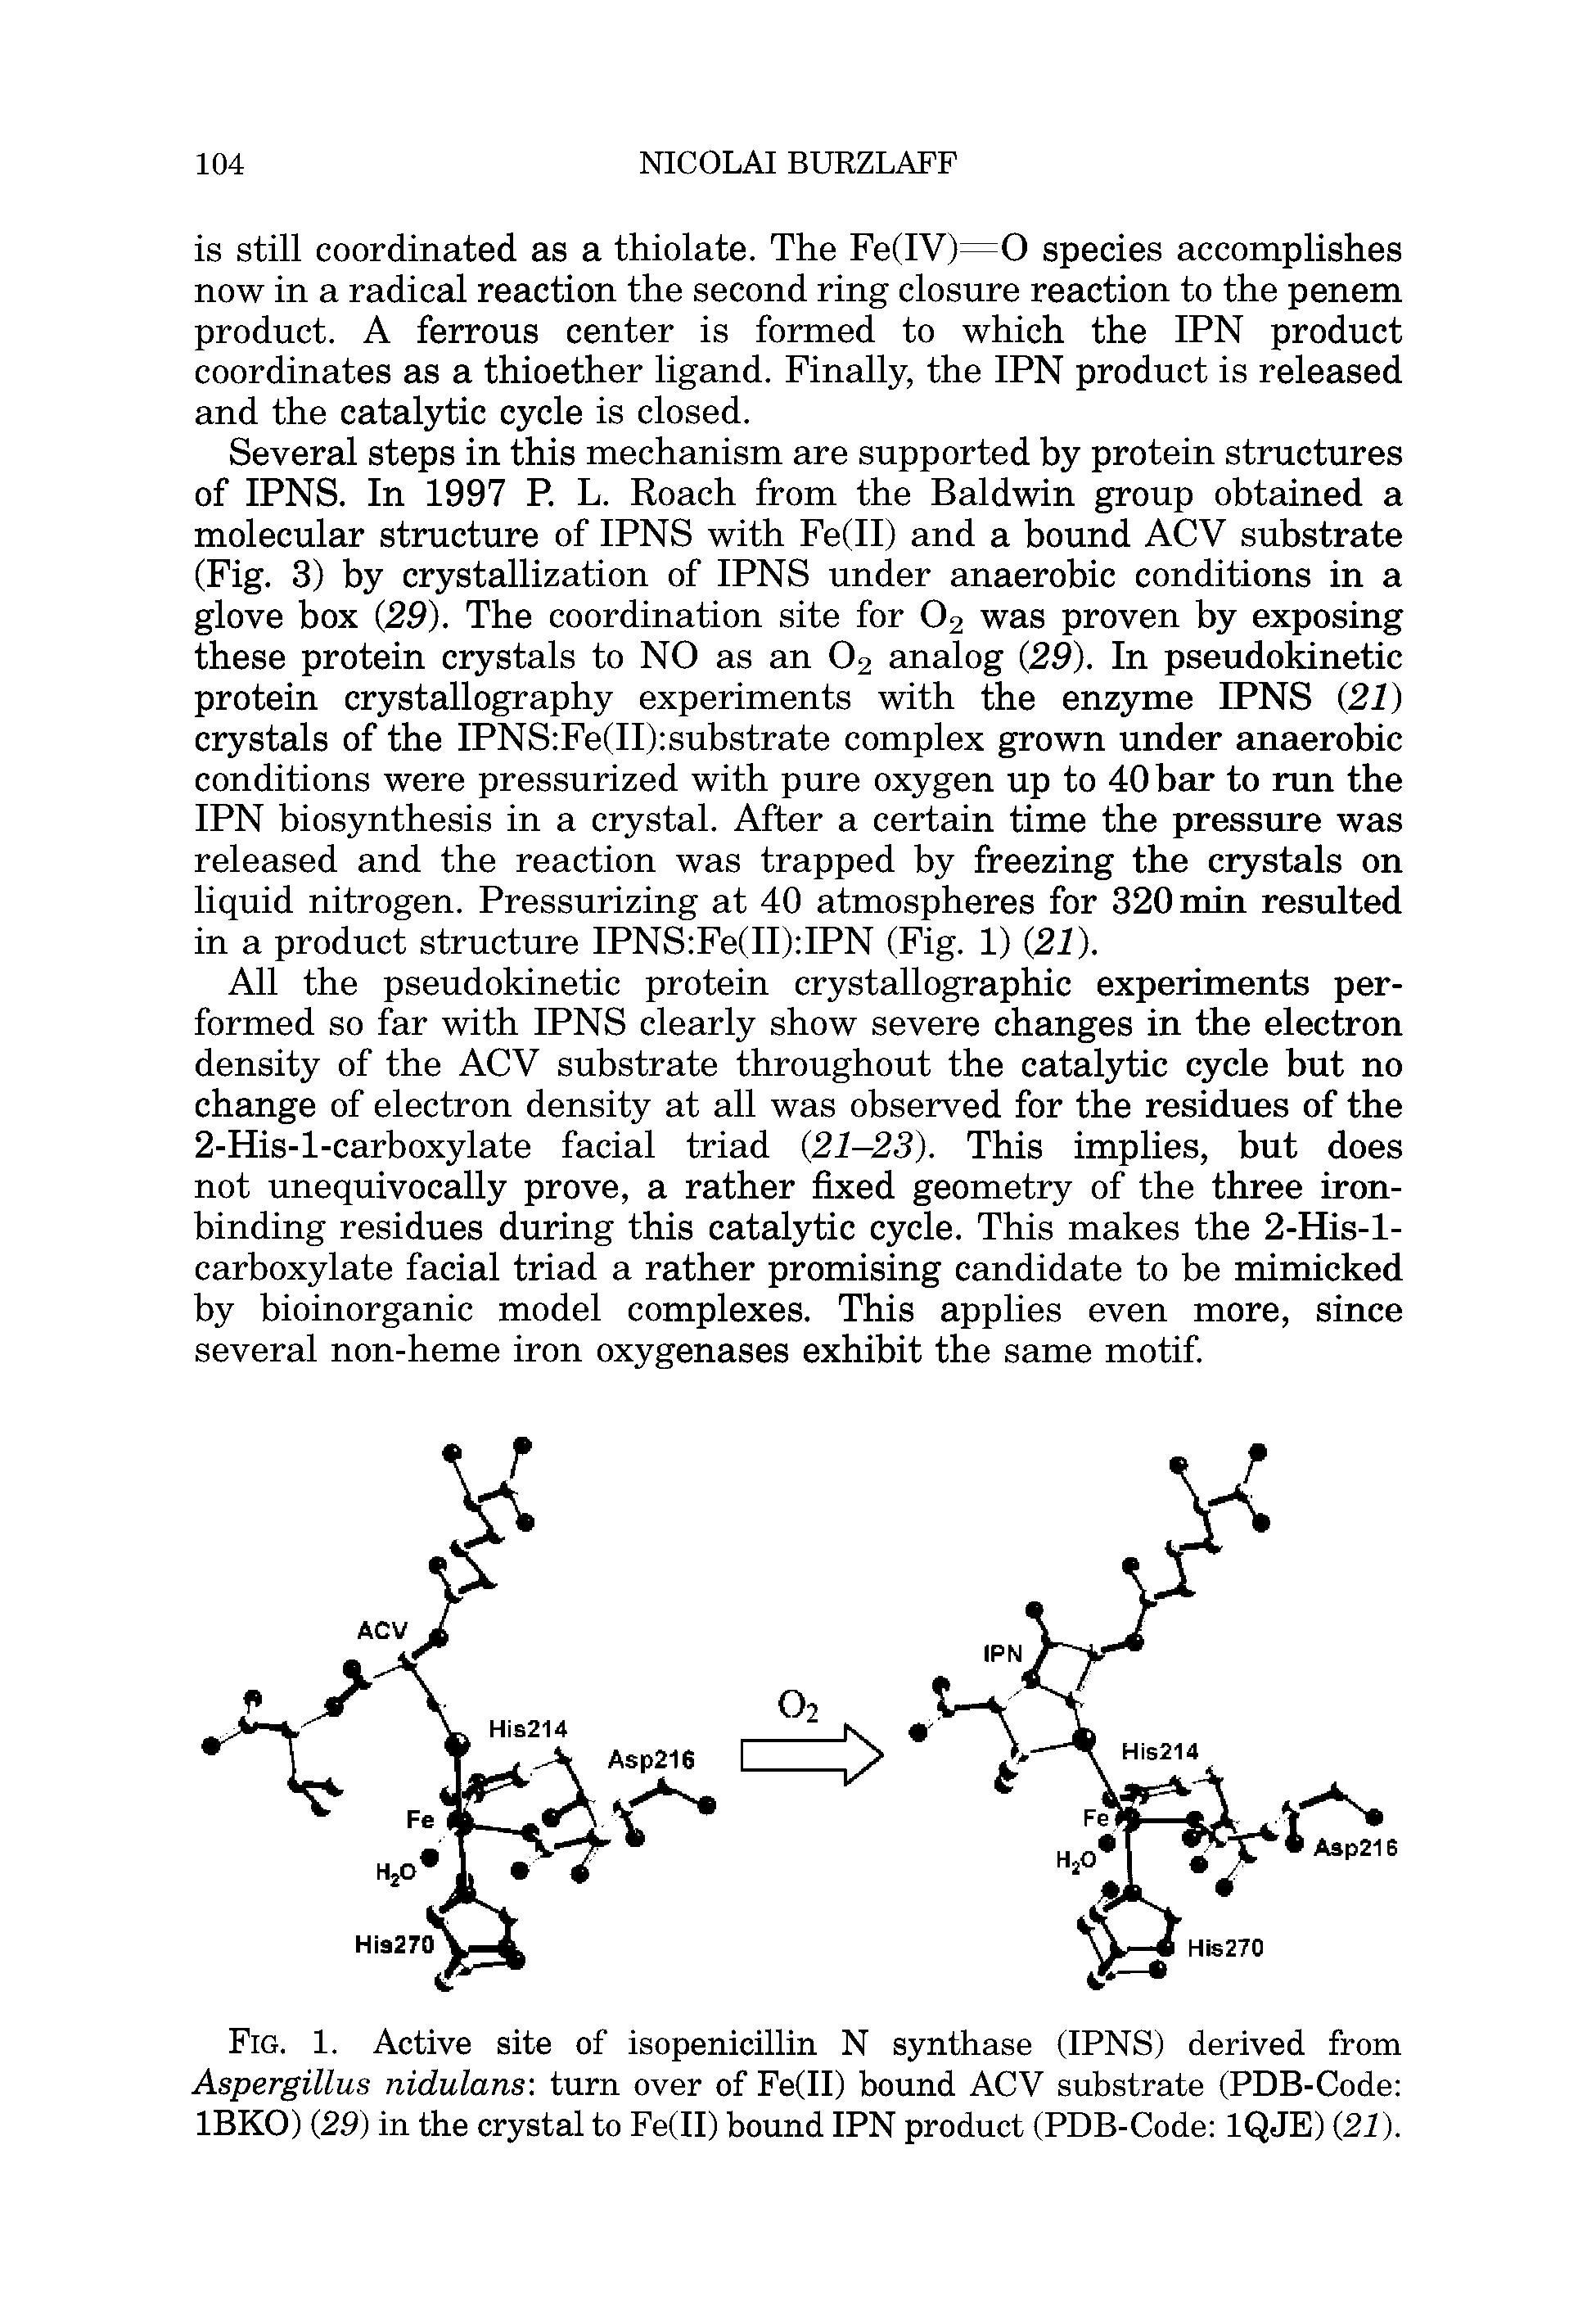 Fig. 1. Active site of isopenicillin N synthase (IPNS) derived from Aspergillus nidulans turn over of Fe(II) bound ACV substrate (PDB-Code IBKO) (29) in the crystal to Fe(II) bound IPN product (PDB-Code IQJE) (21).